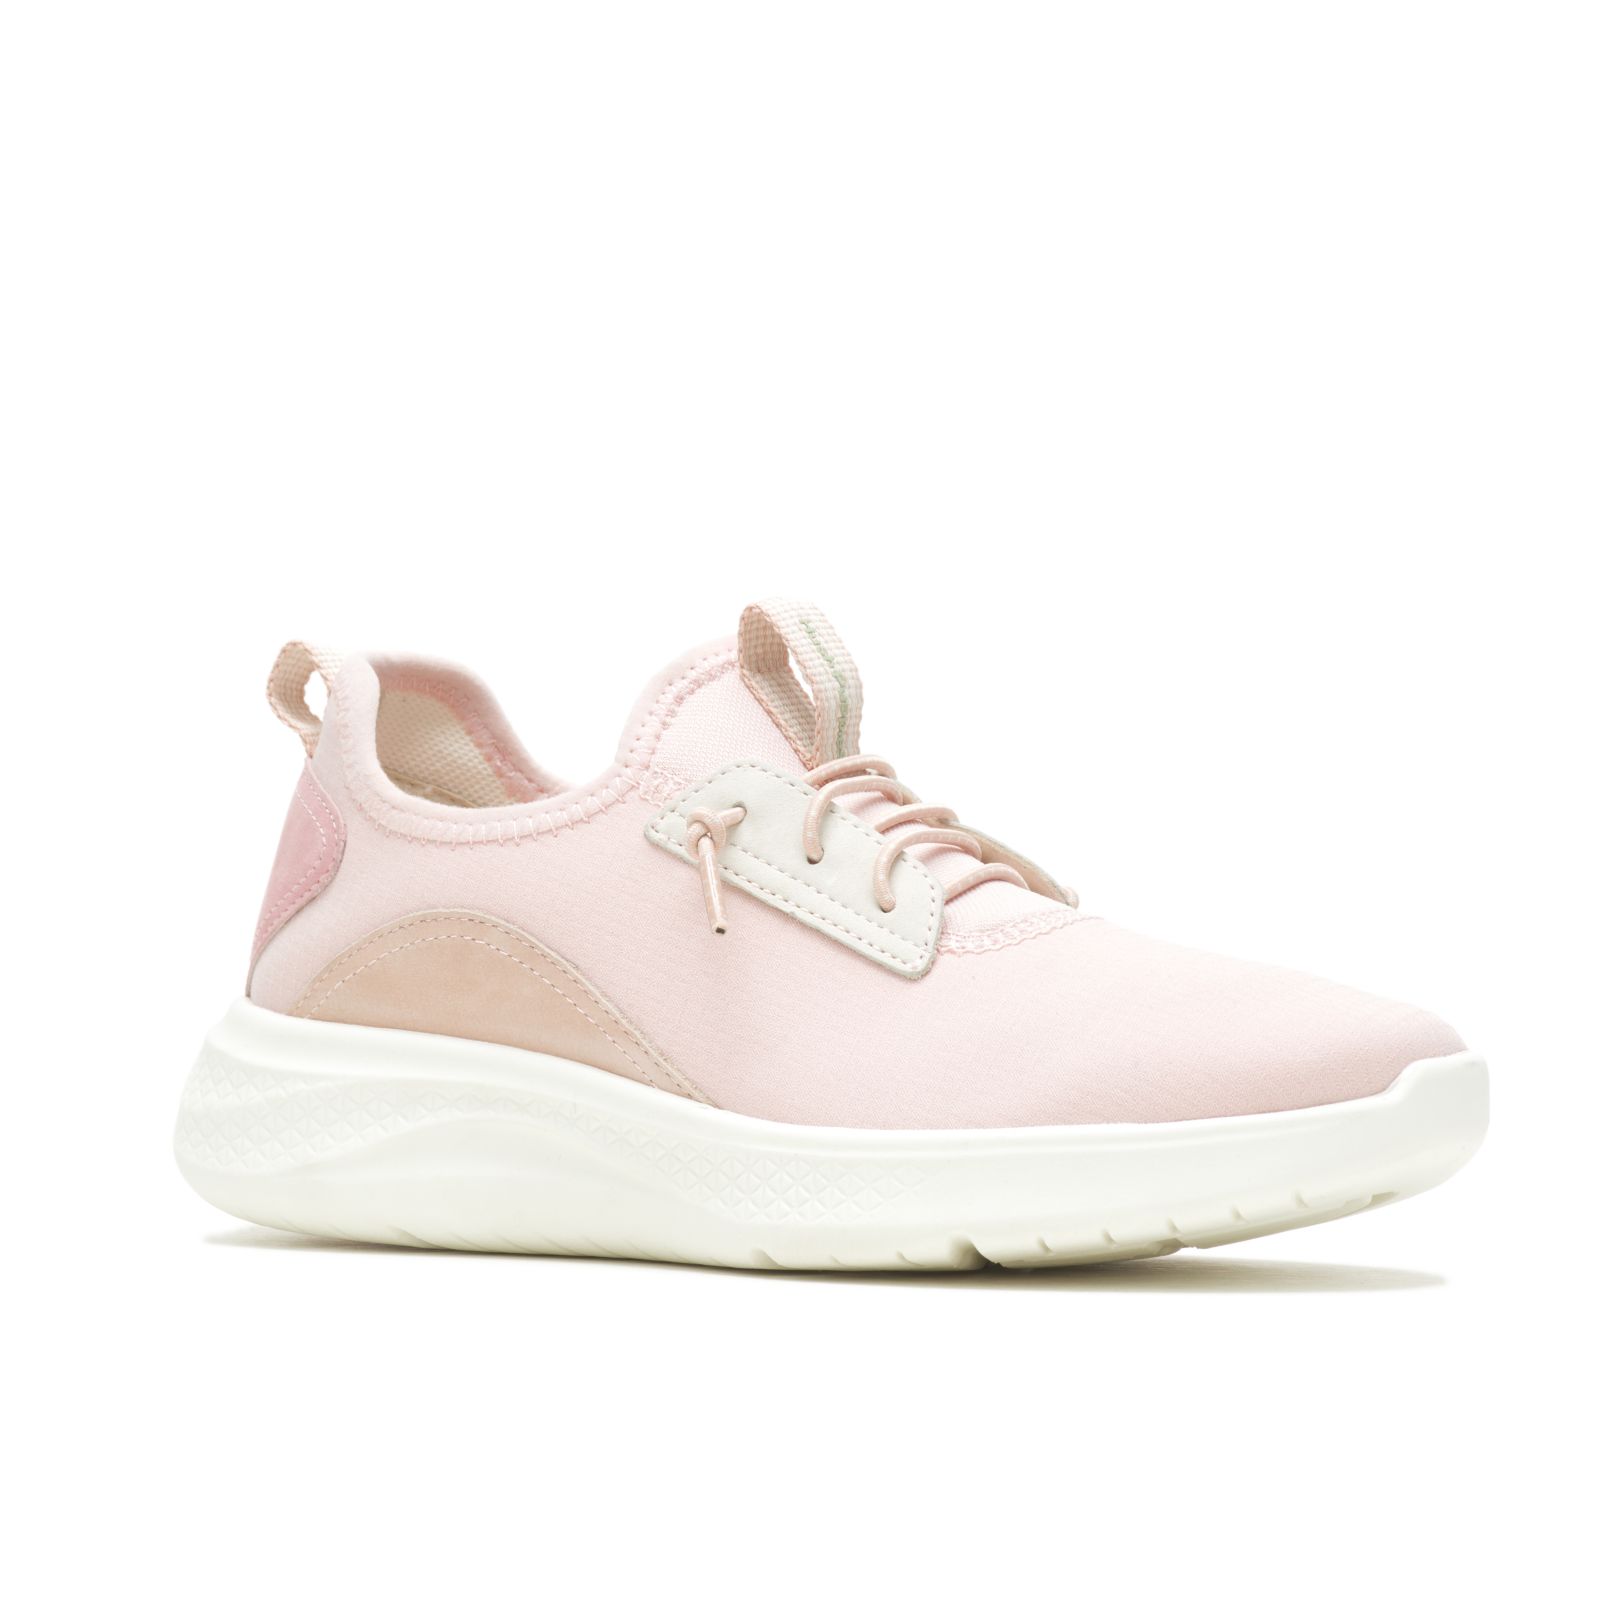 Tenis Hush Puppies Elevate Bungee Mujer Rosas | VHMSZPA-75